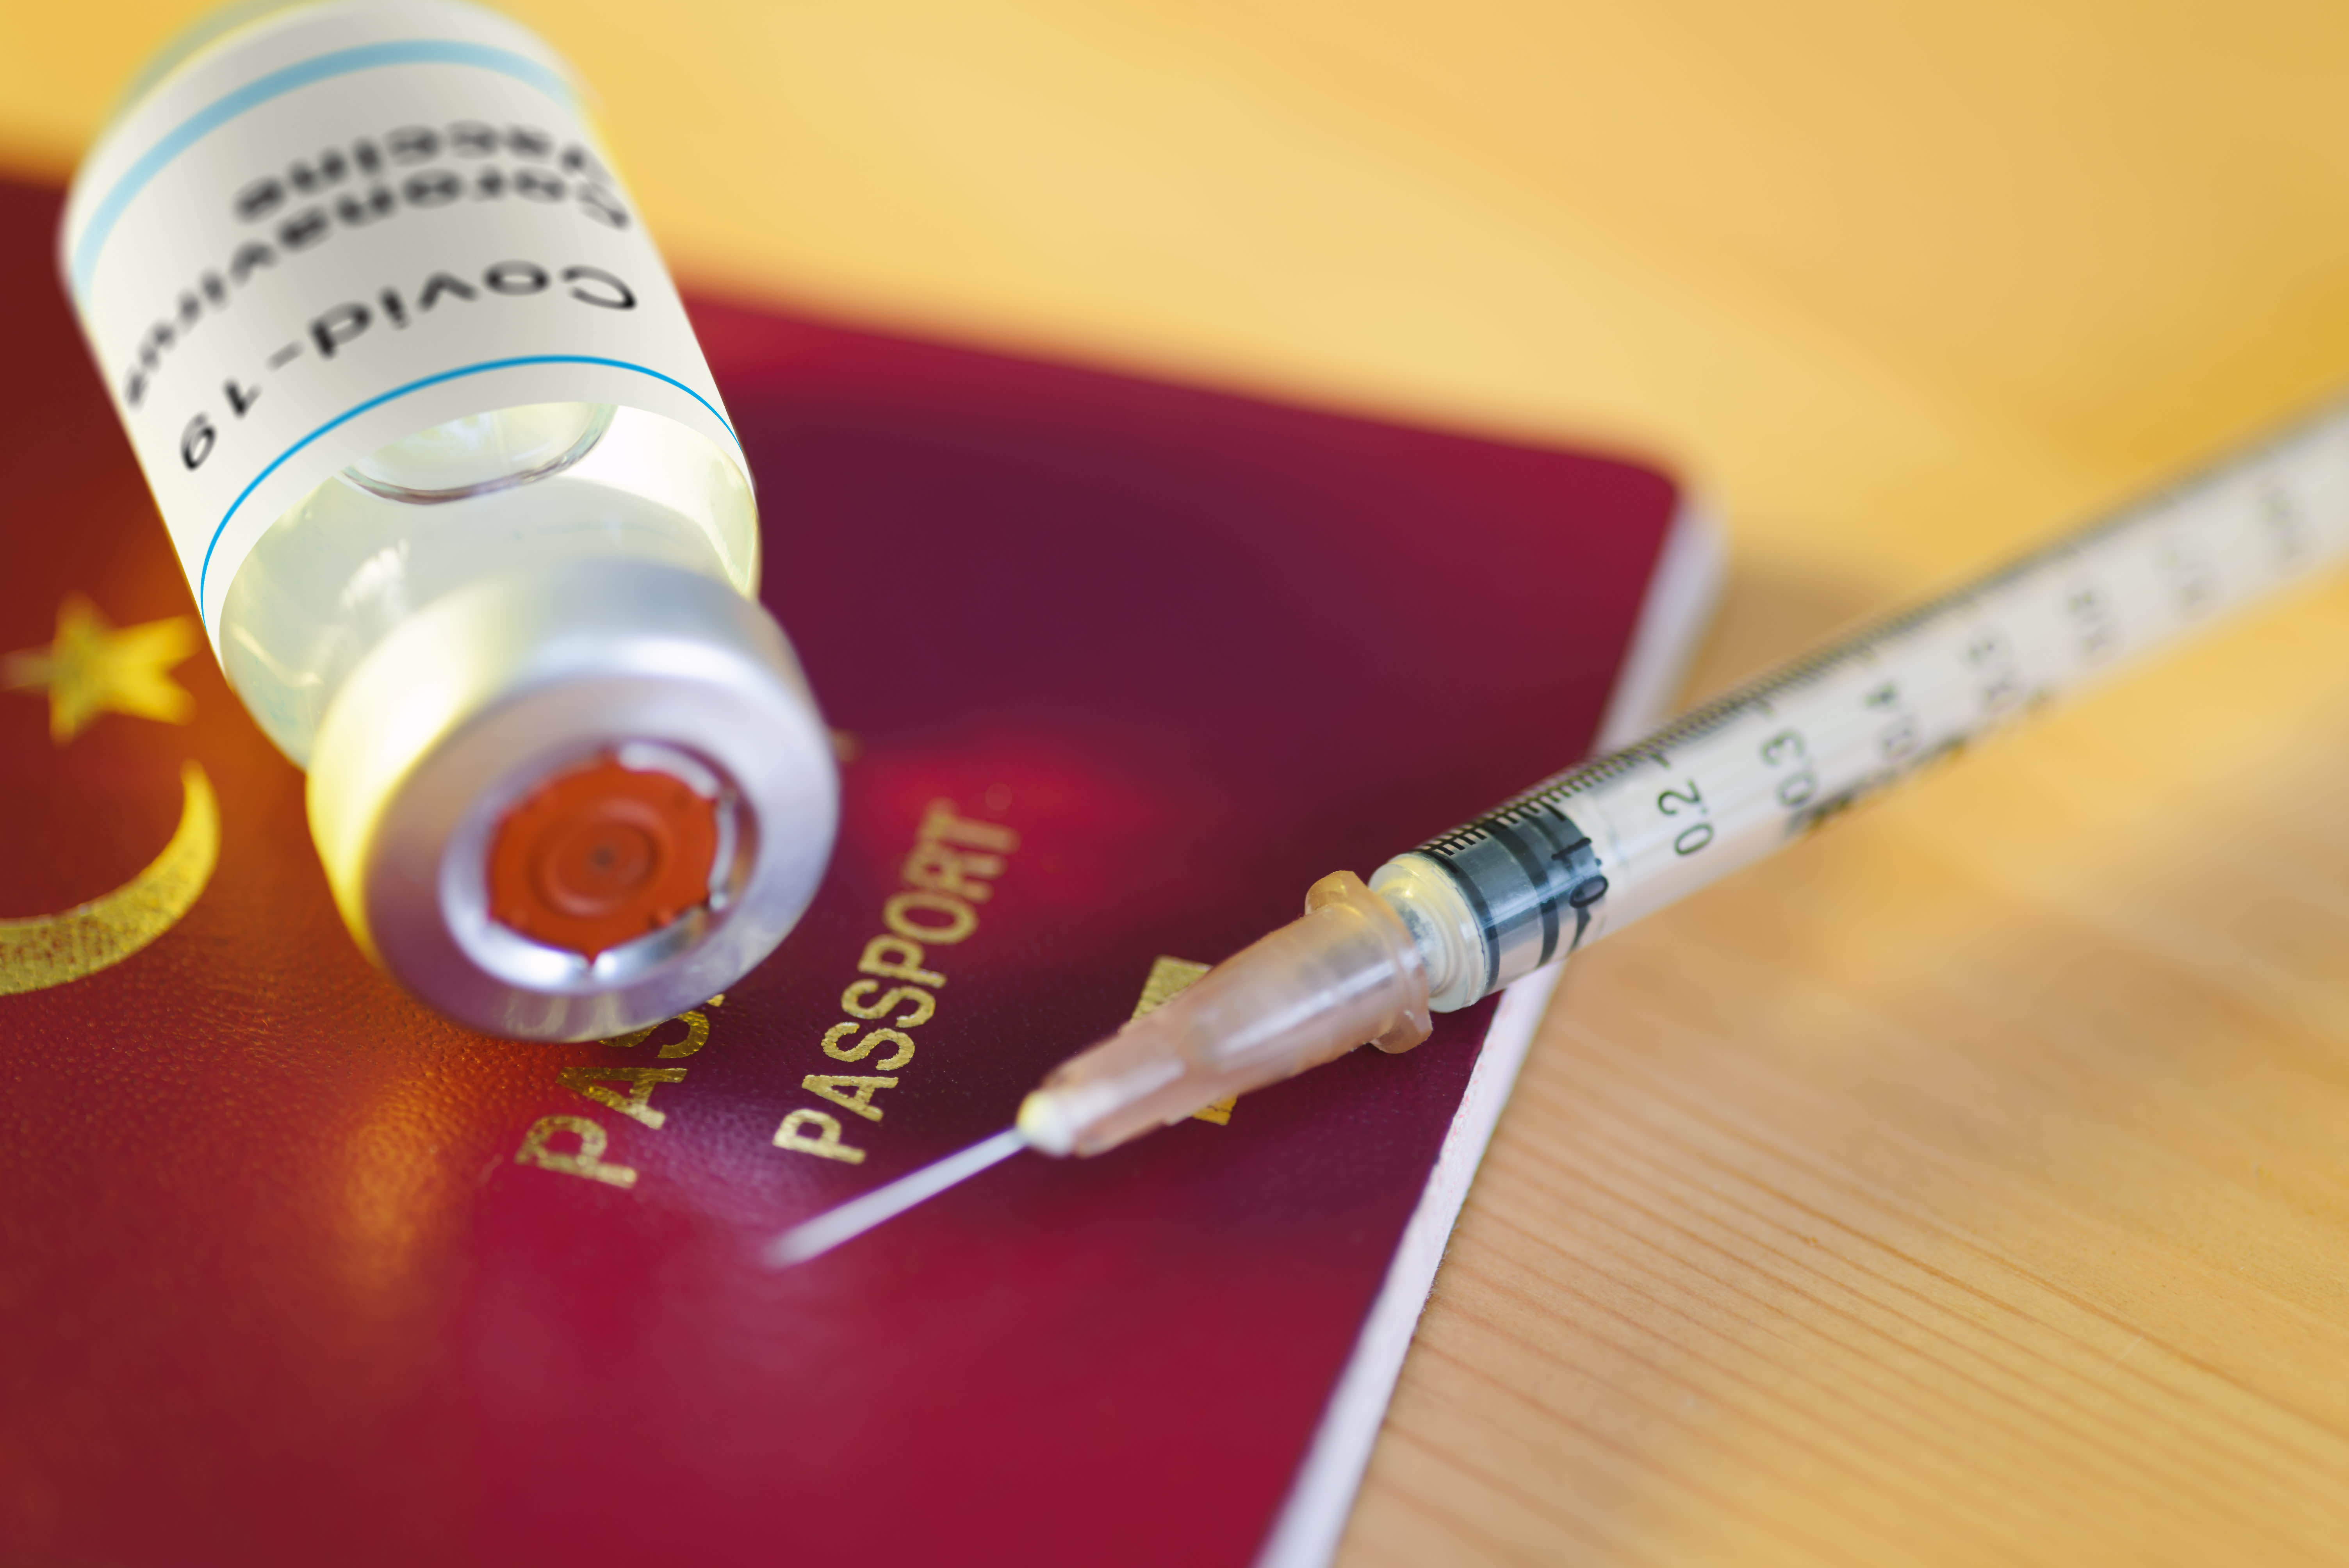 Will I need proof of vaccination to travel abroad?